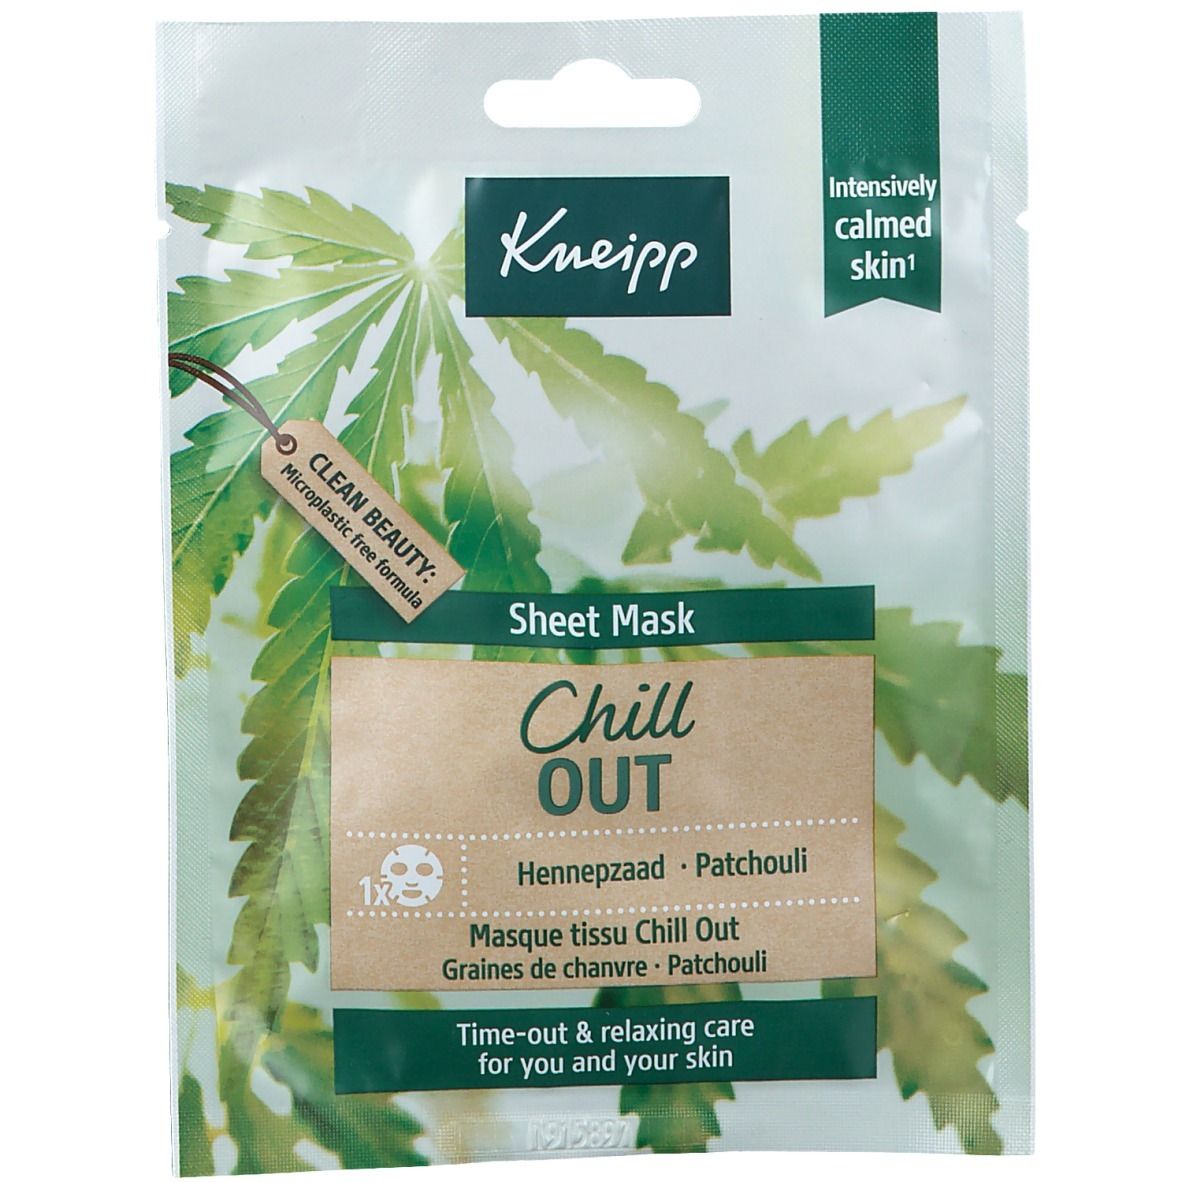 Kneipp Sheet Mask Chill Out